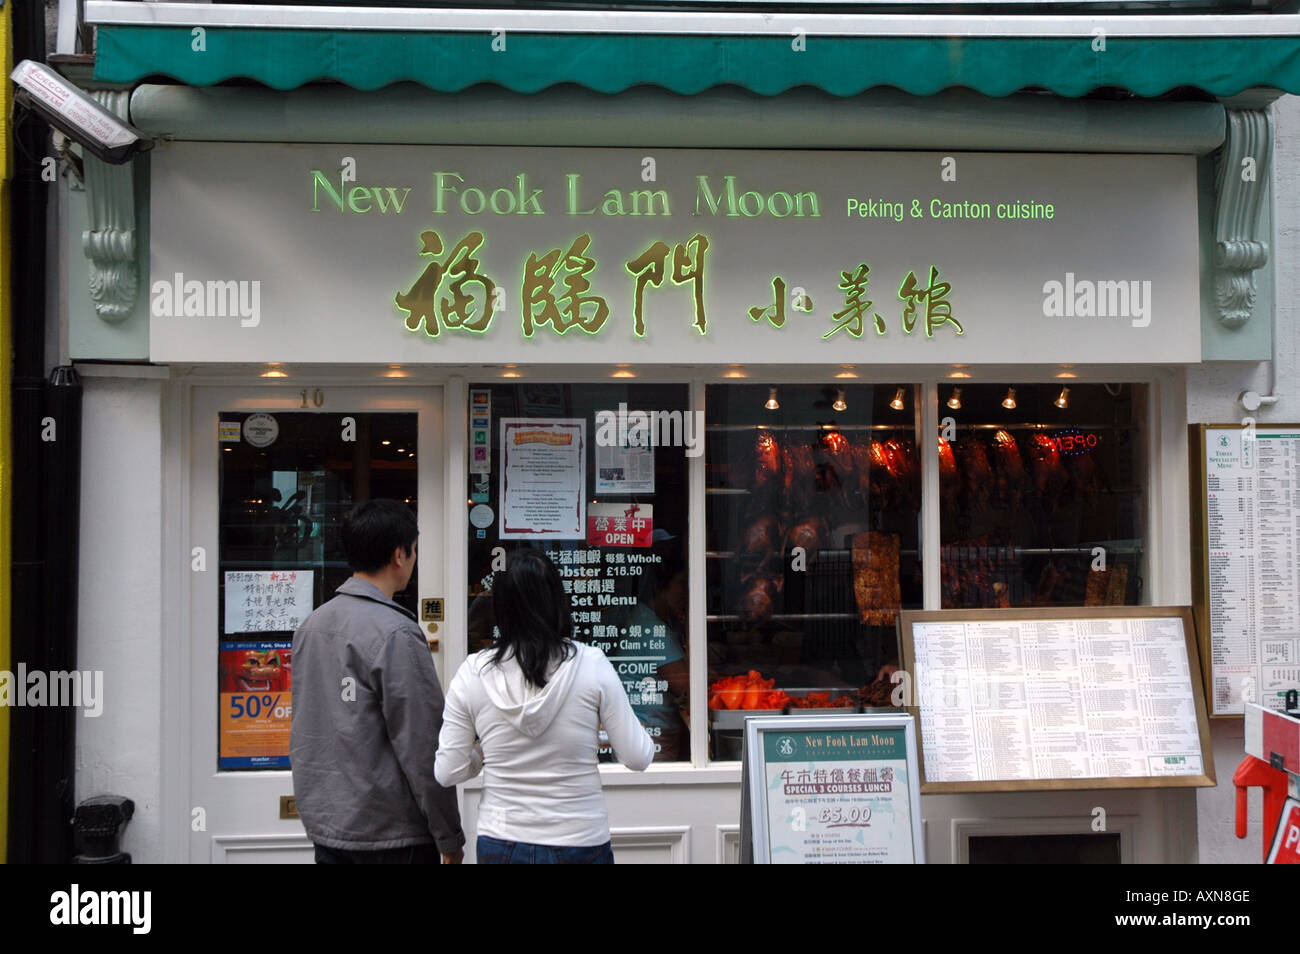 New Fook Lam Moon chinese restaurant at Gerrard Street in London Chinatown  Stock Photo - Alamy